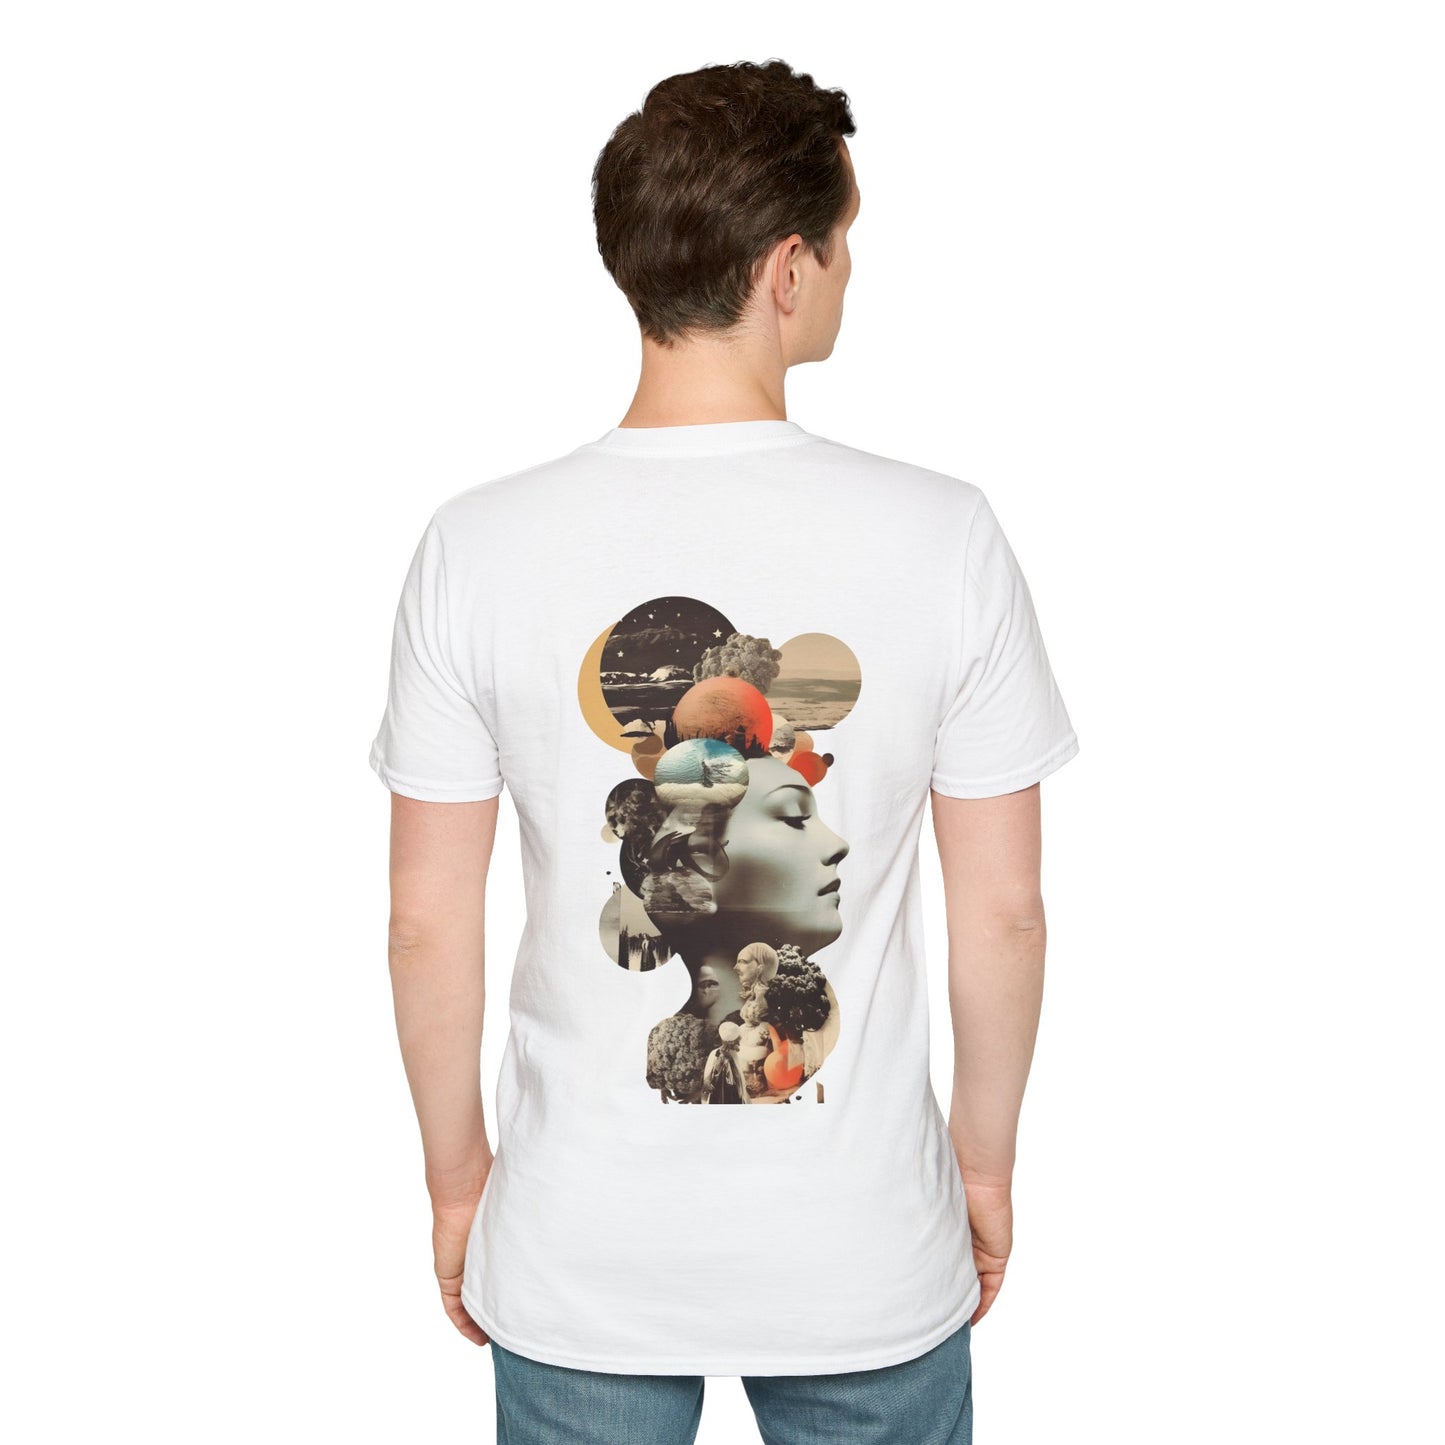 White T-shirt with a collage of a mysterious figure surrounded by butterflies and roses